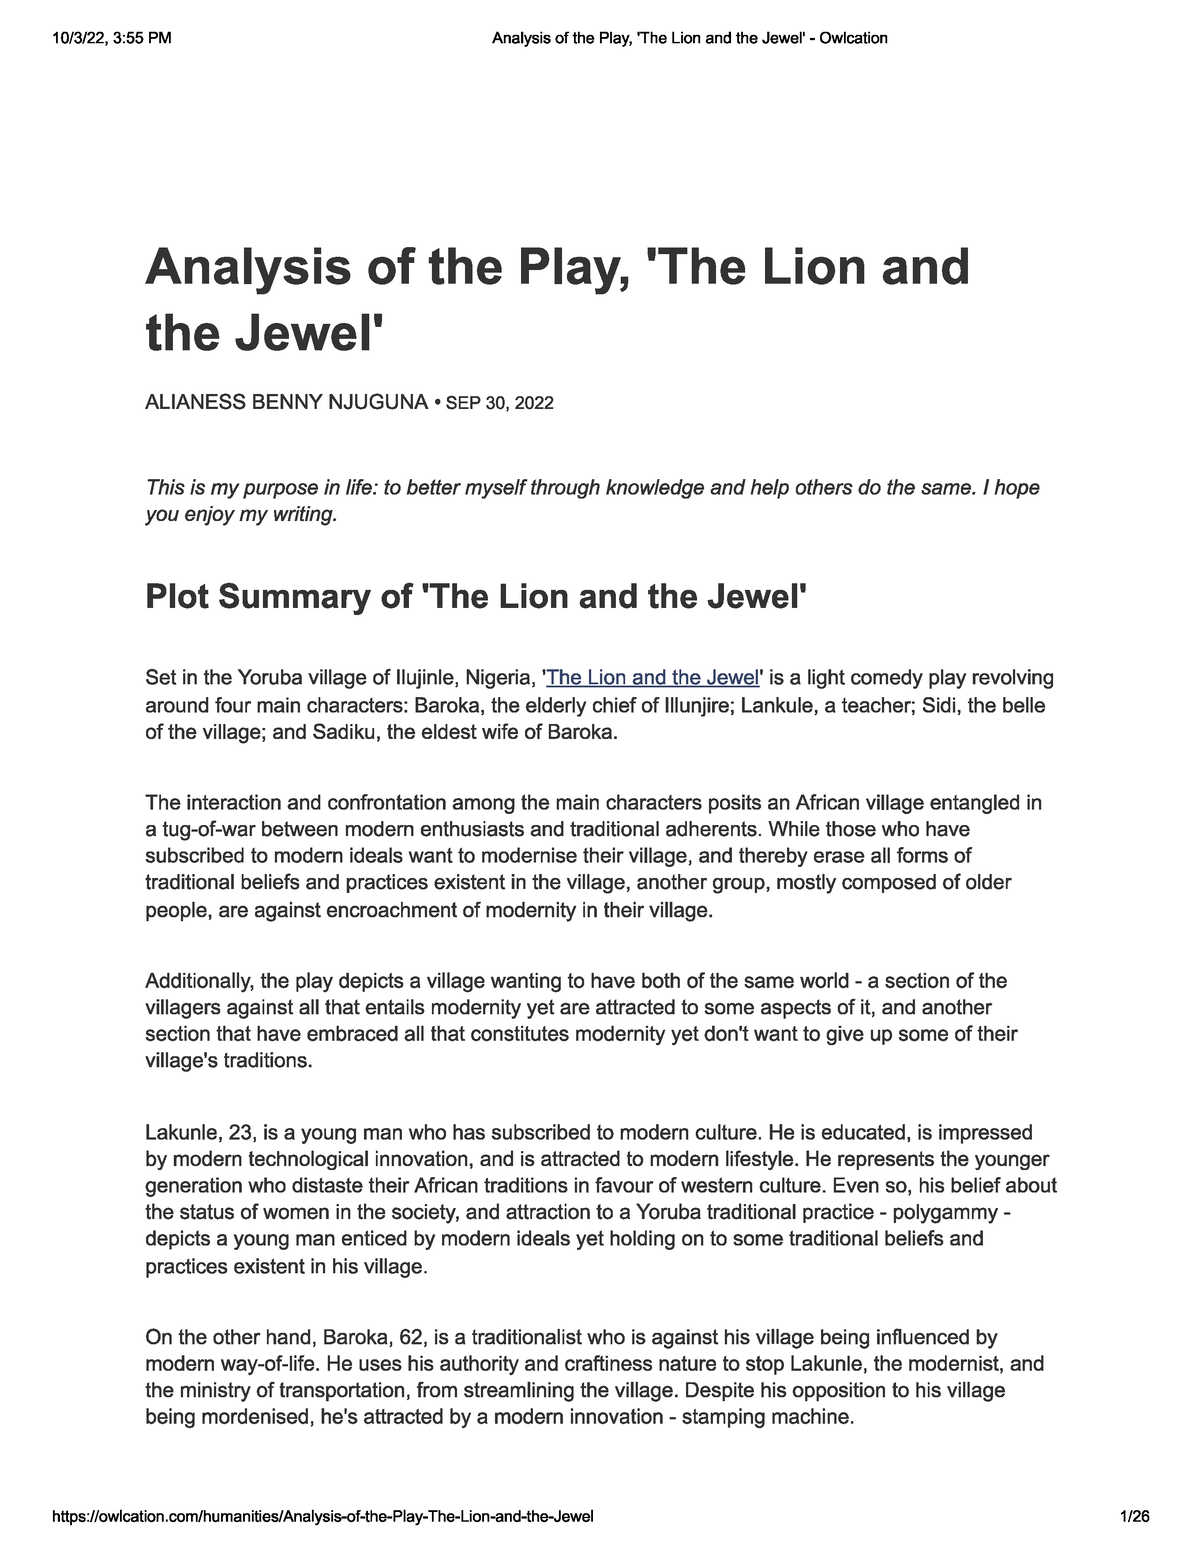 essay questions on the lion and the jewel